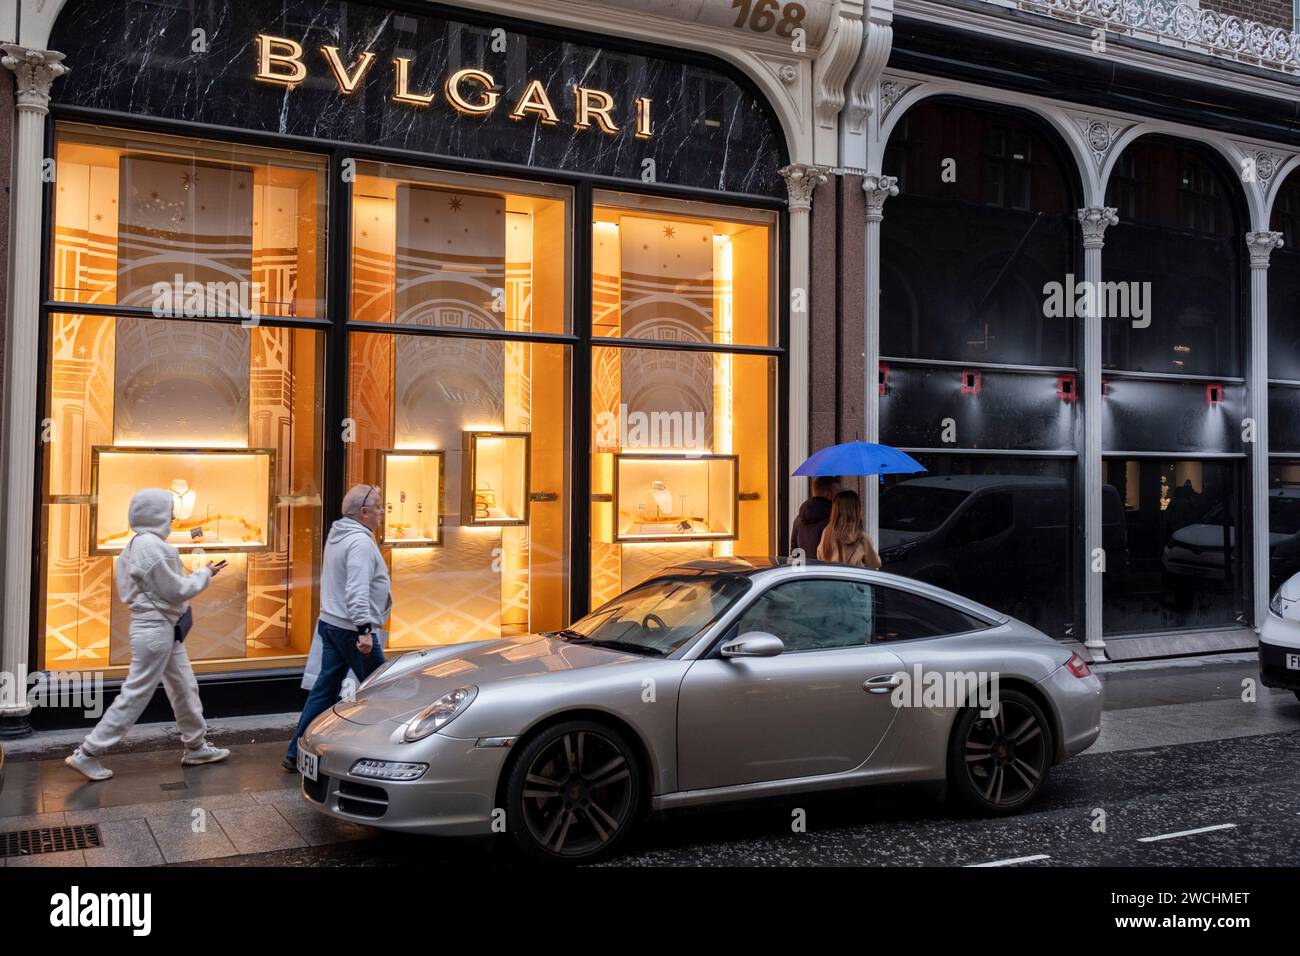 Porsche car parked outside Bvlgari along on Bond Street on 4th December 2023 in London, United Kingdom. Bond Street is one of the principal streets in the West End shopping district and is very upmarket. It has been a fashionable shopping street since the 18th century. The rich and wealthy shop here mostly for high end fashion and jewellery. Stock Photo